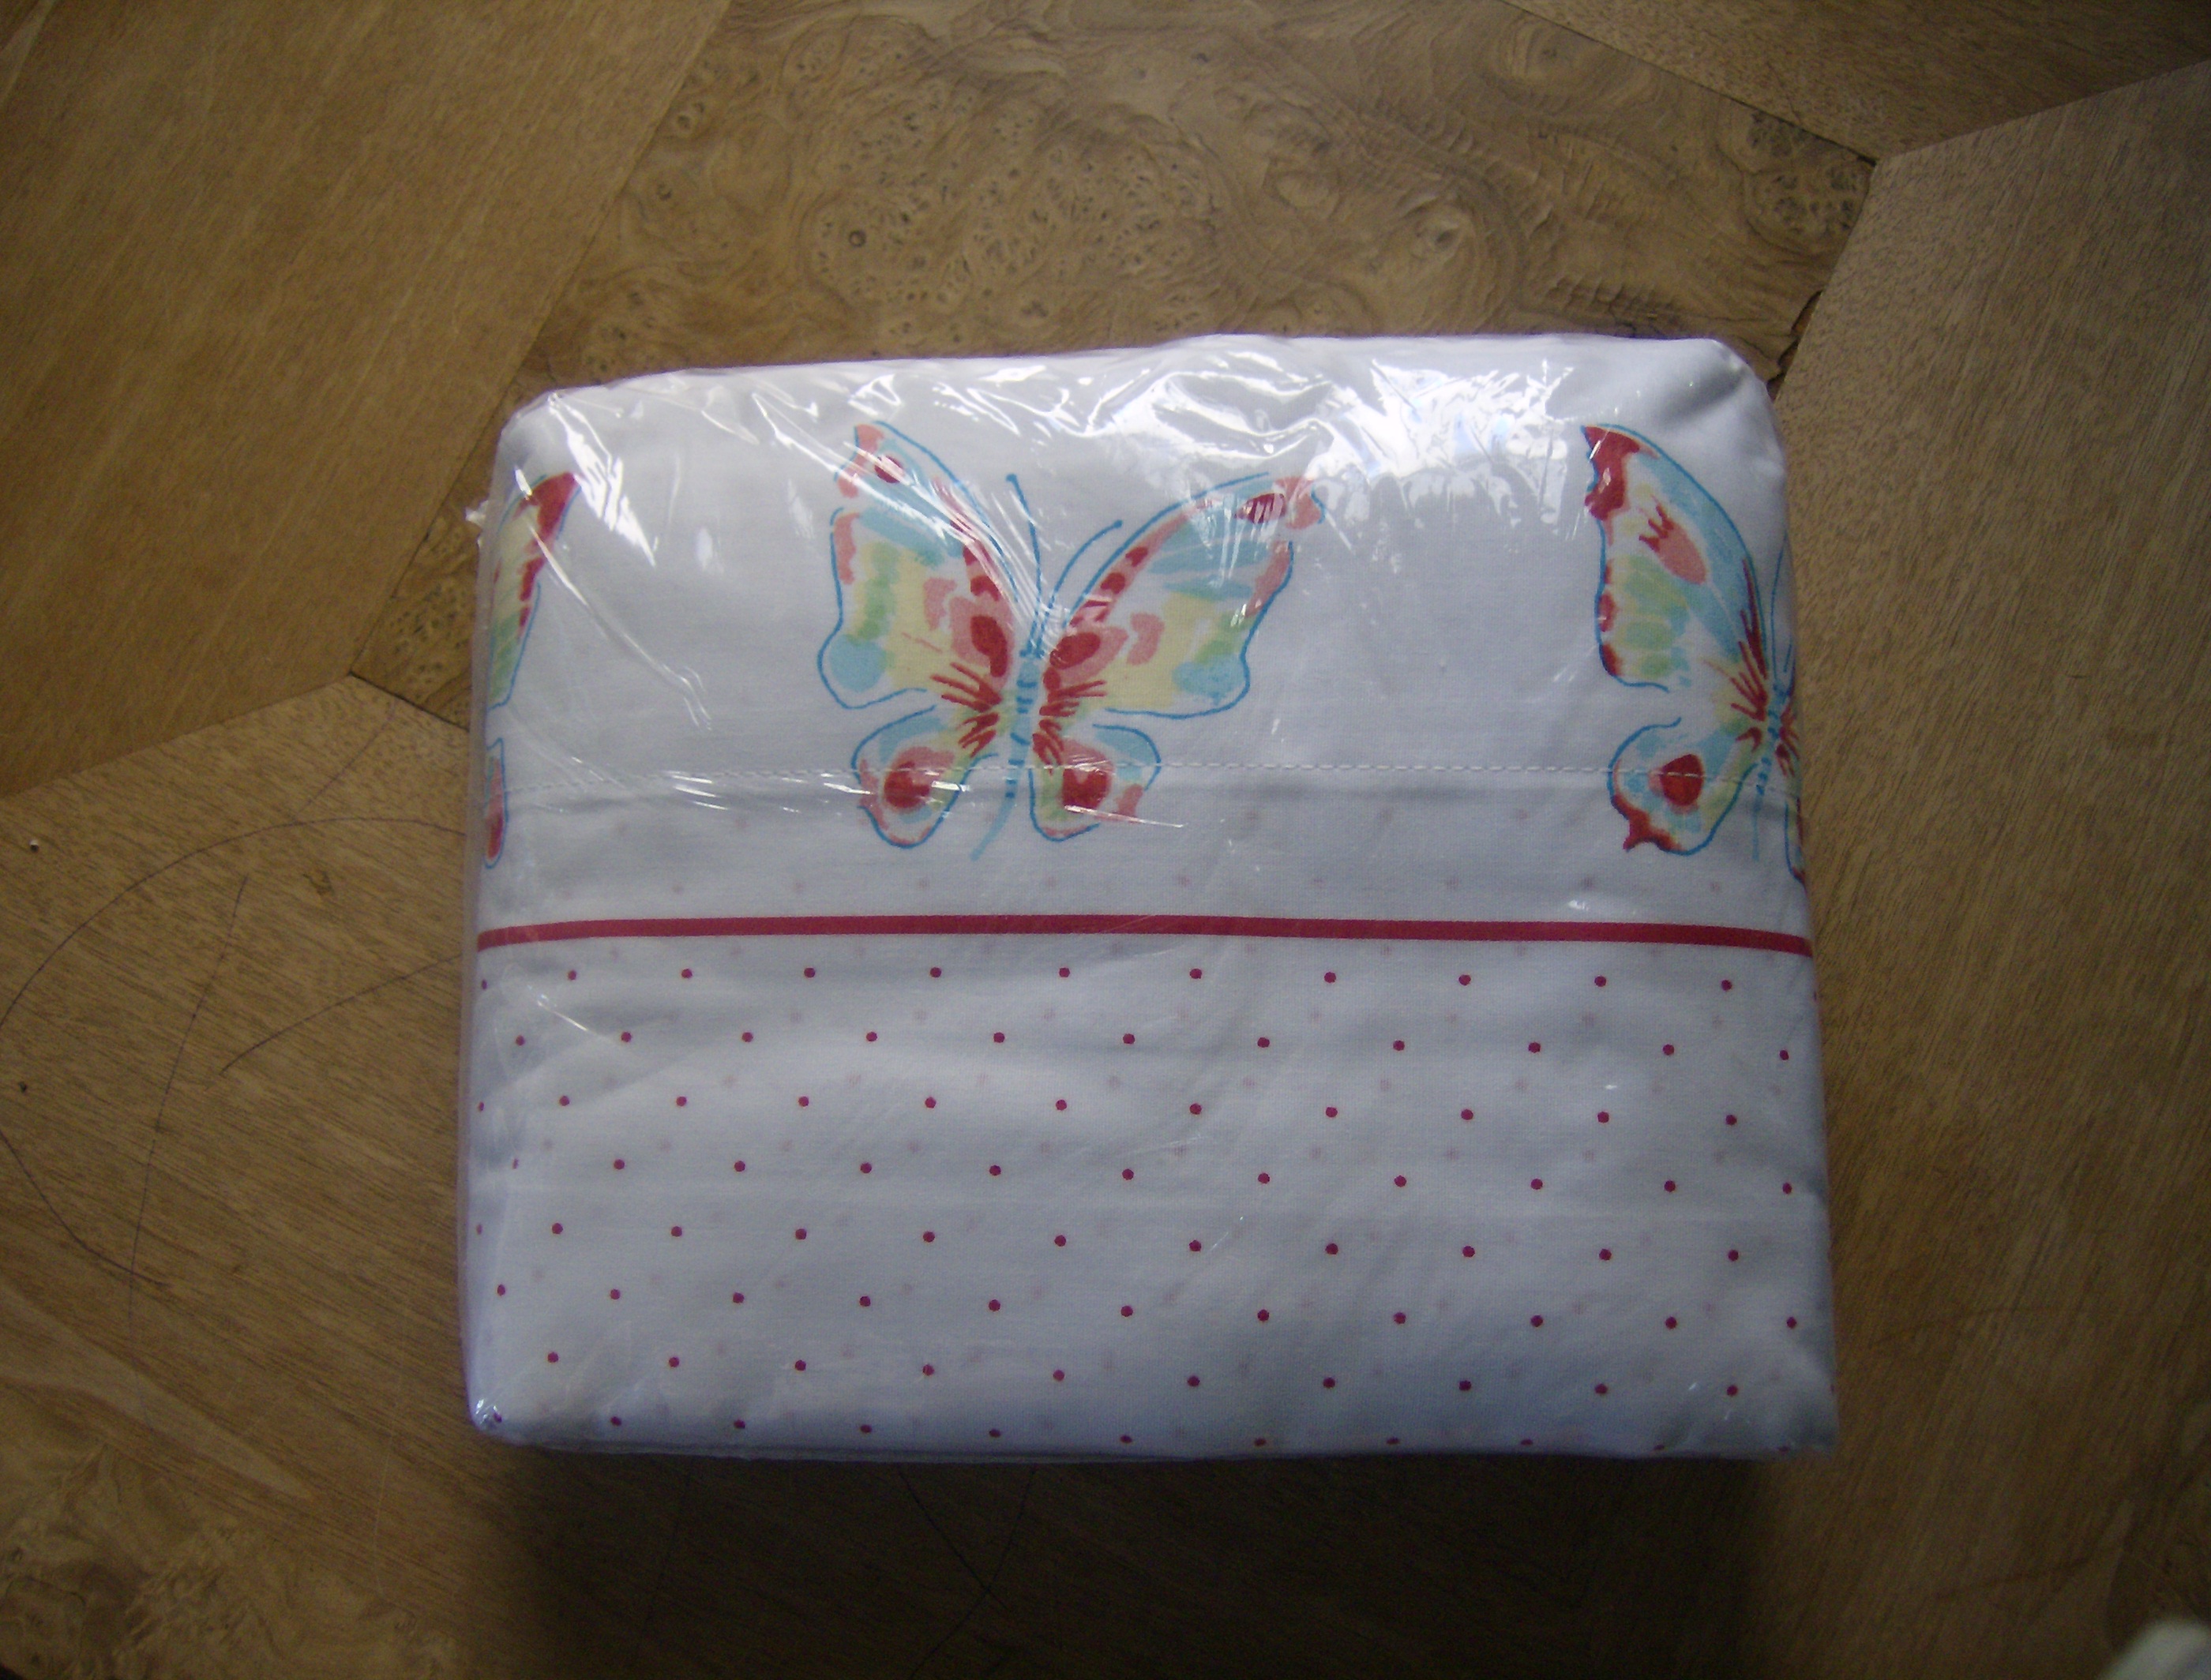 Full Sized Sheet Set - New in Package